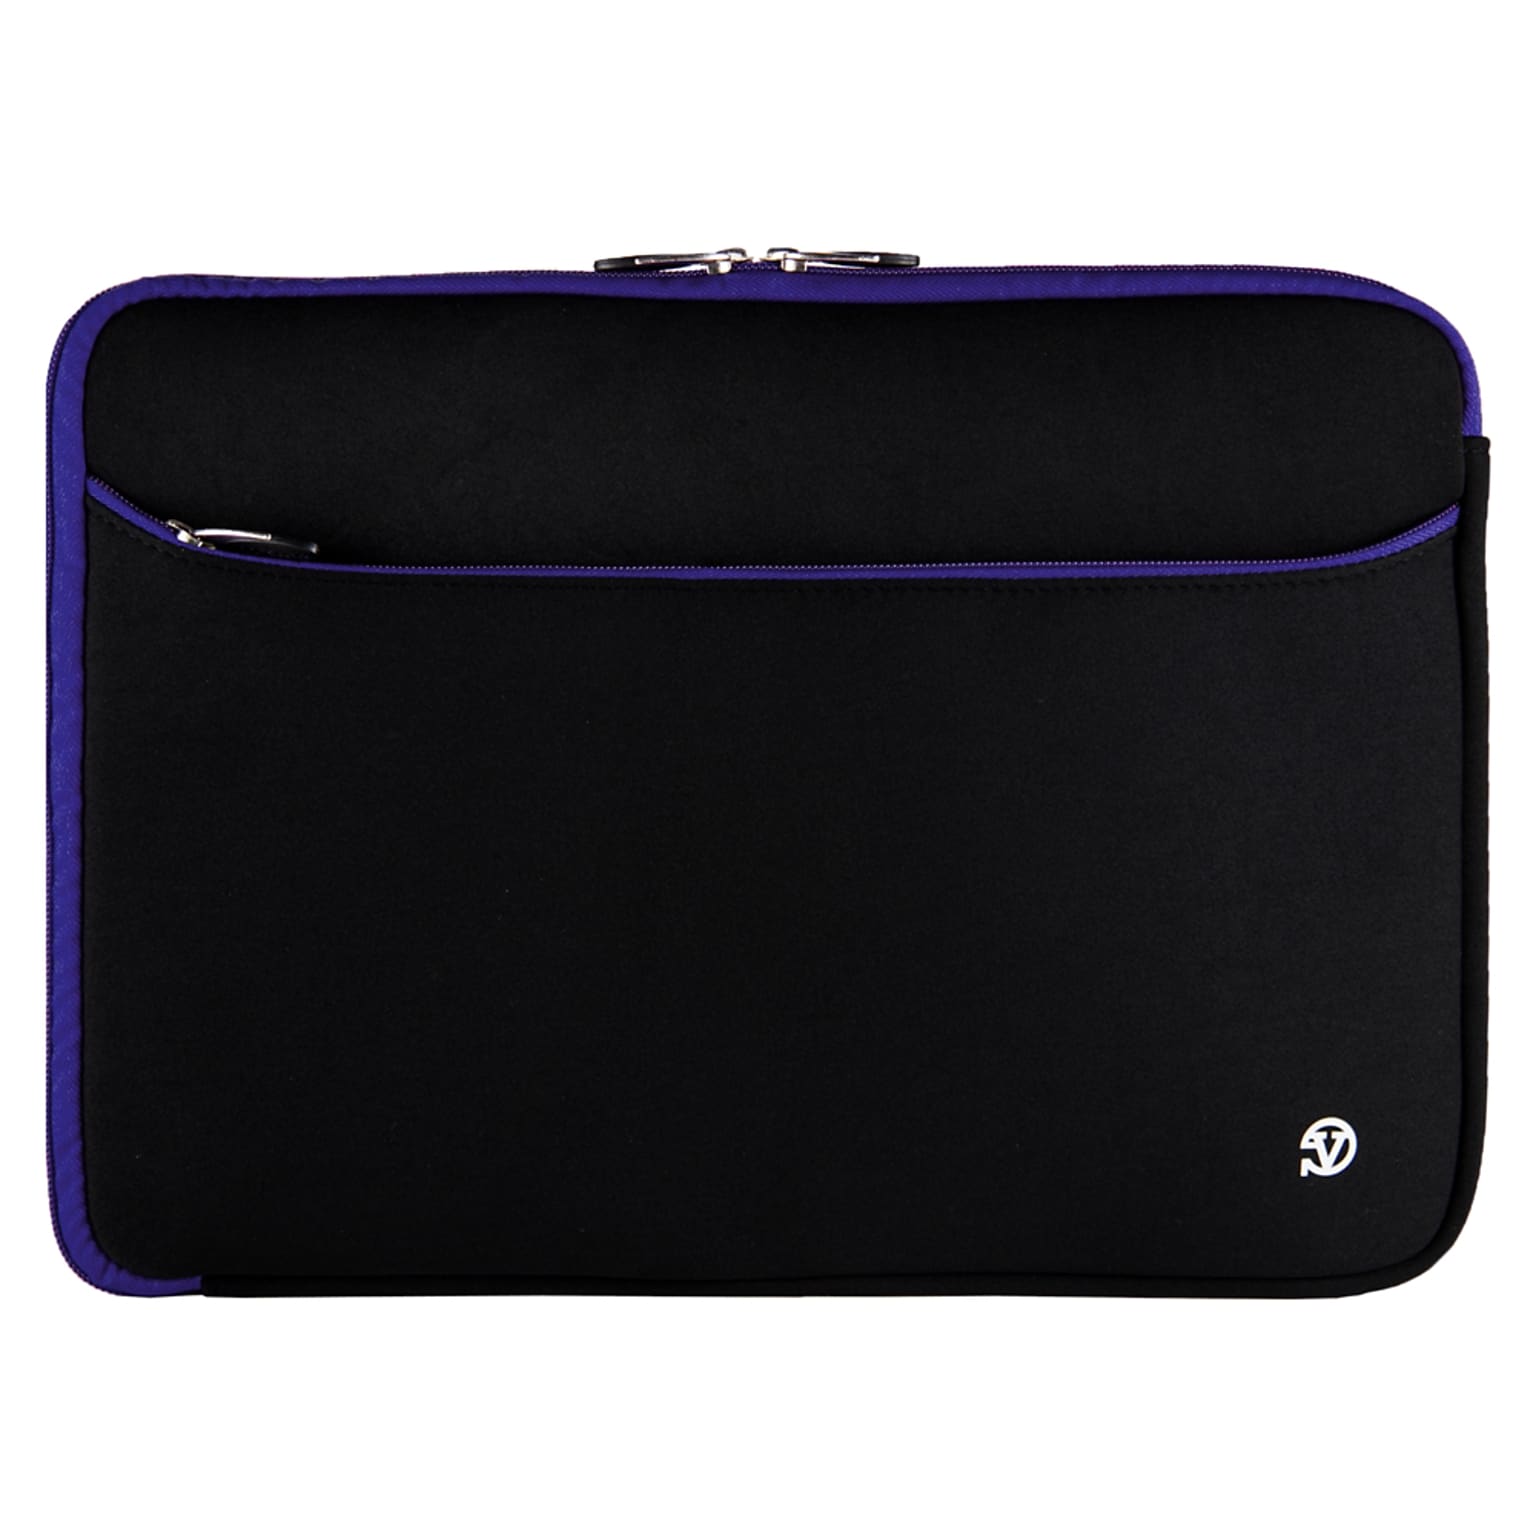 Vangoddy Neoprene Laptop Carrying Sleeve Fits up to 14 Laptops (Black with Blue Trim)